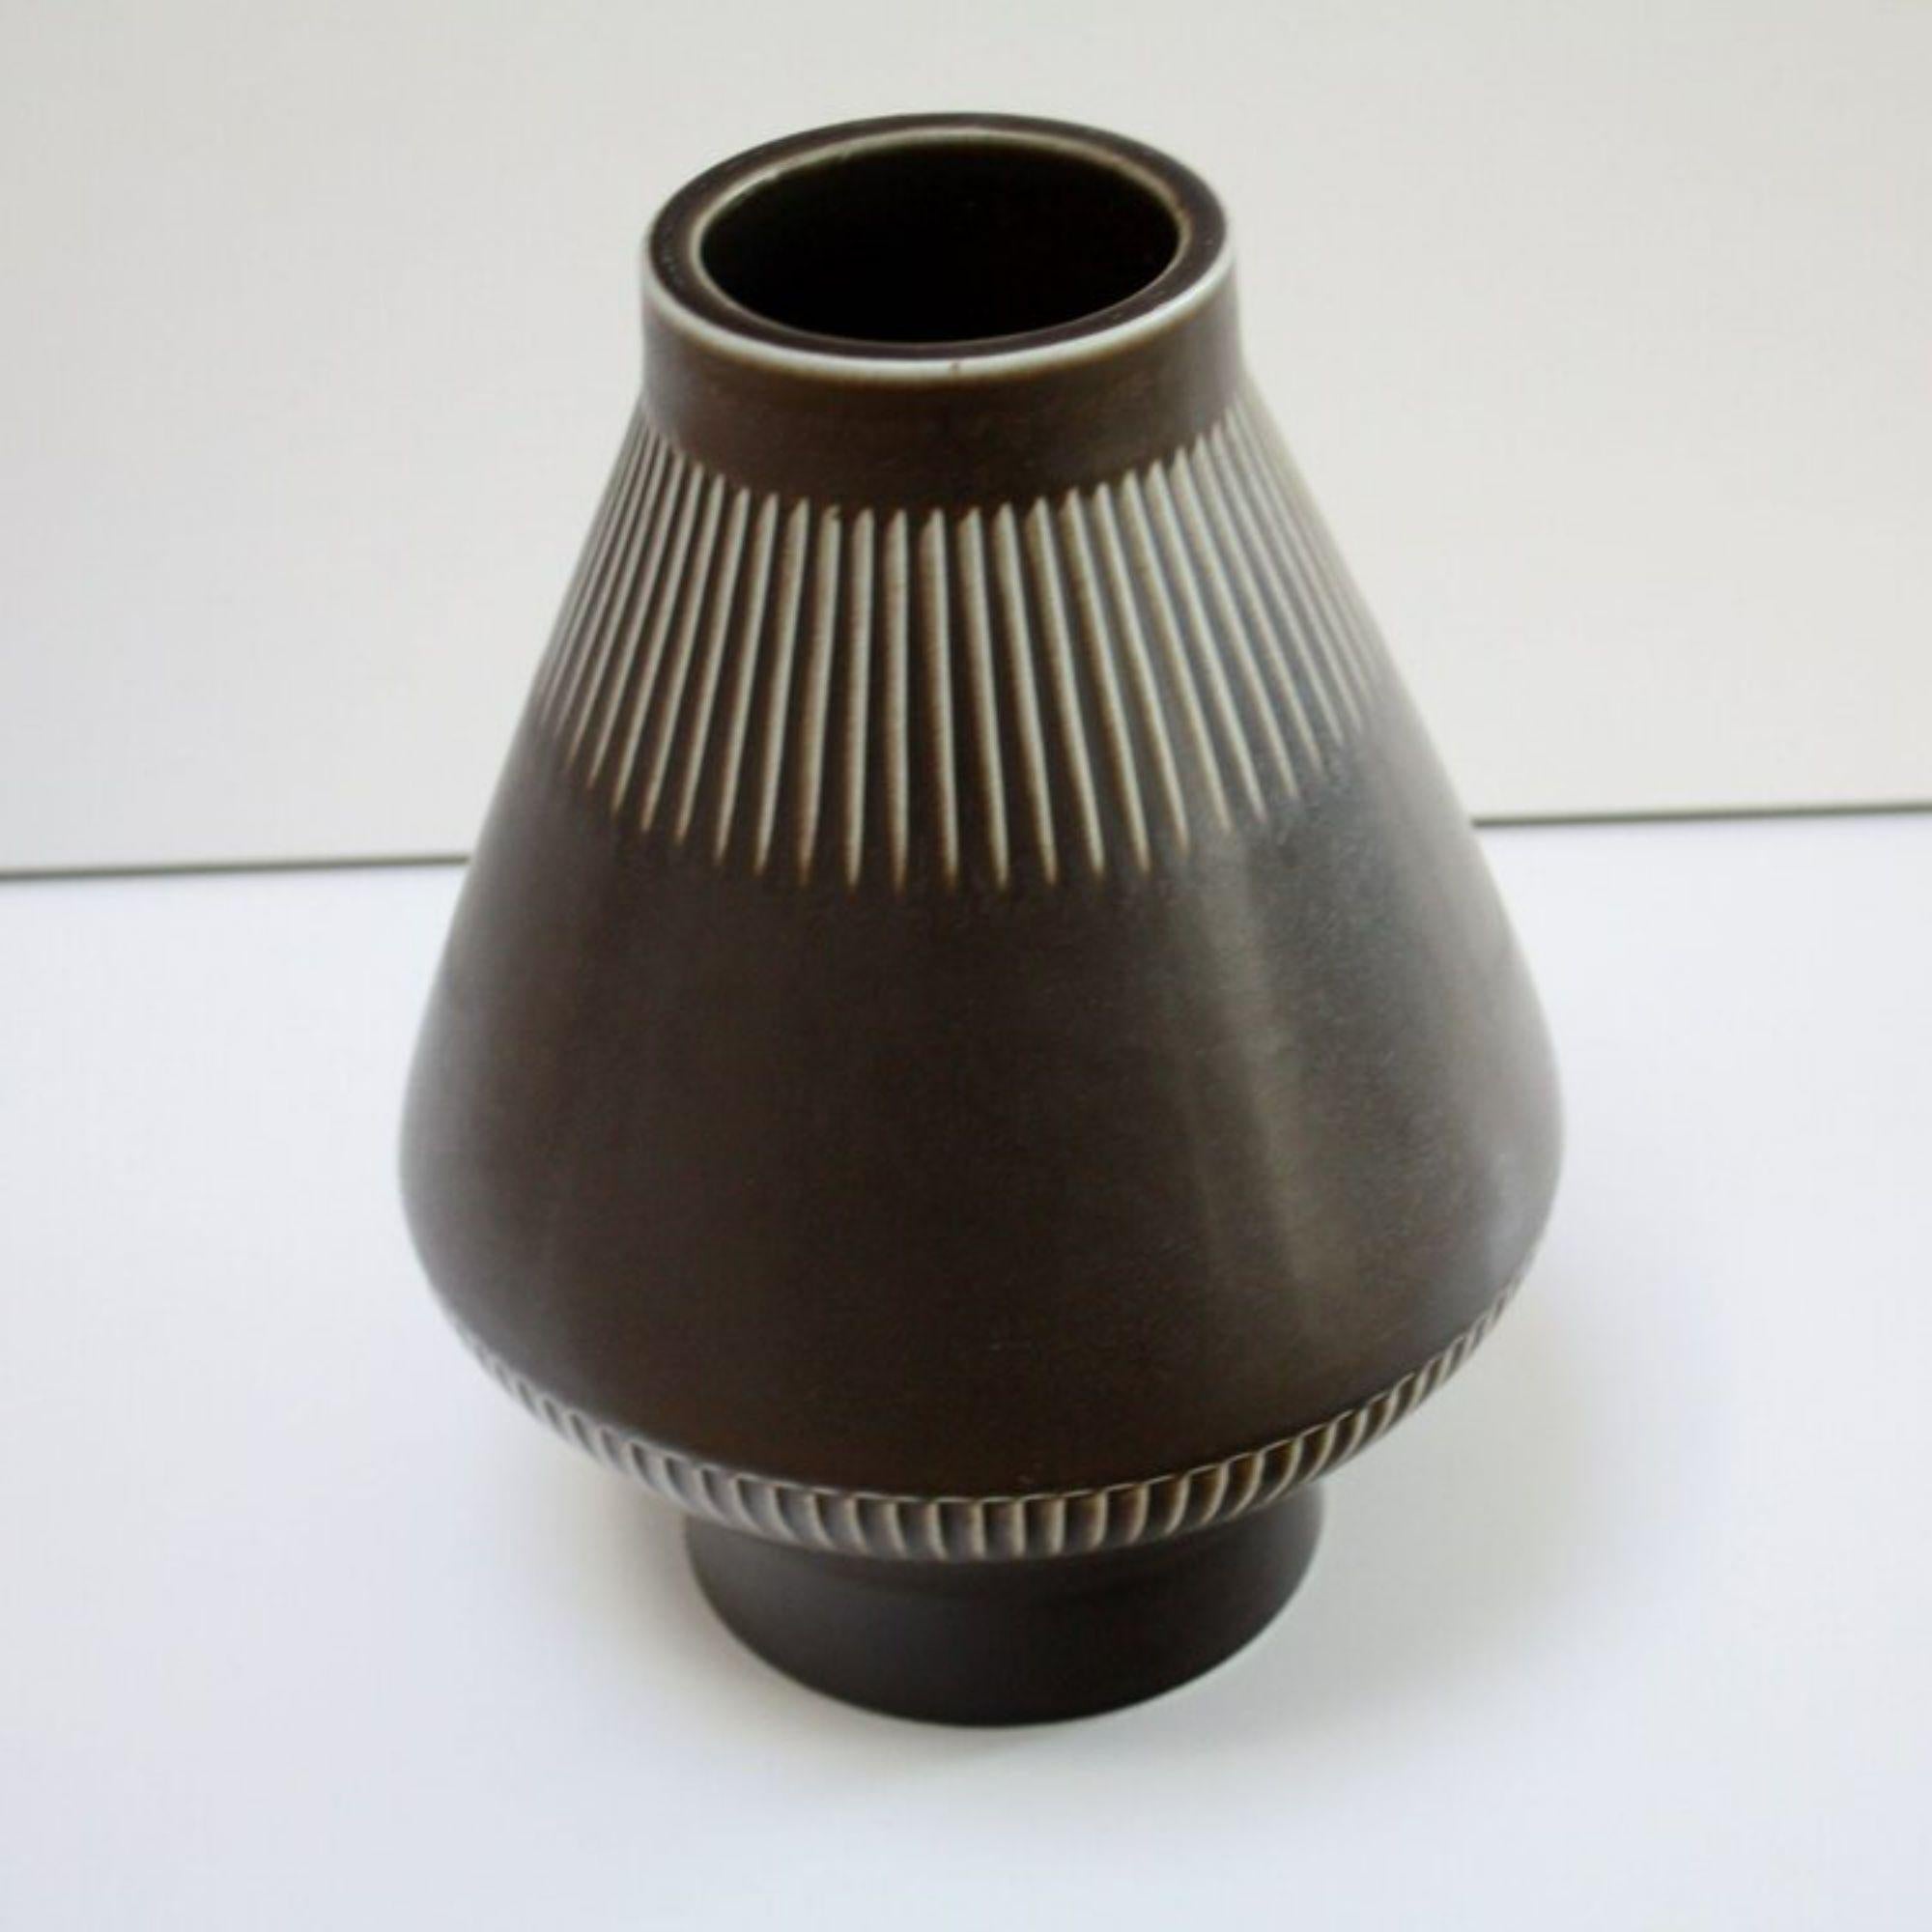 Highly collectible stoneware vase by Carl Harry Stalhane for Rorstrand with brown-cream HaresFur glaze, c.1950's. Incised on bottom, with Rorstrand emblem and 3-